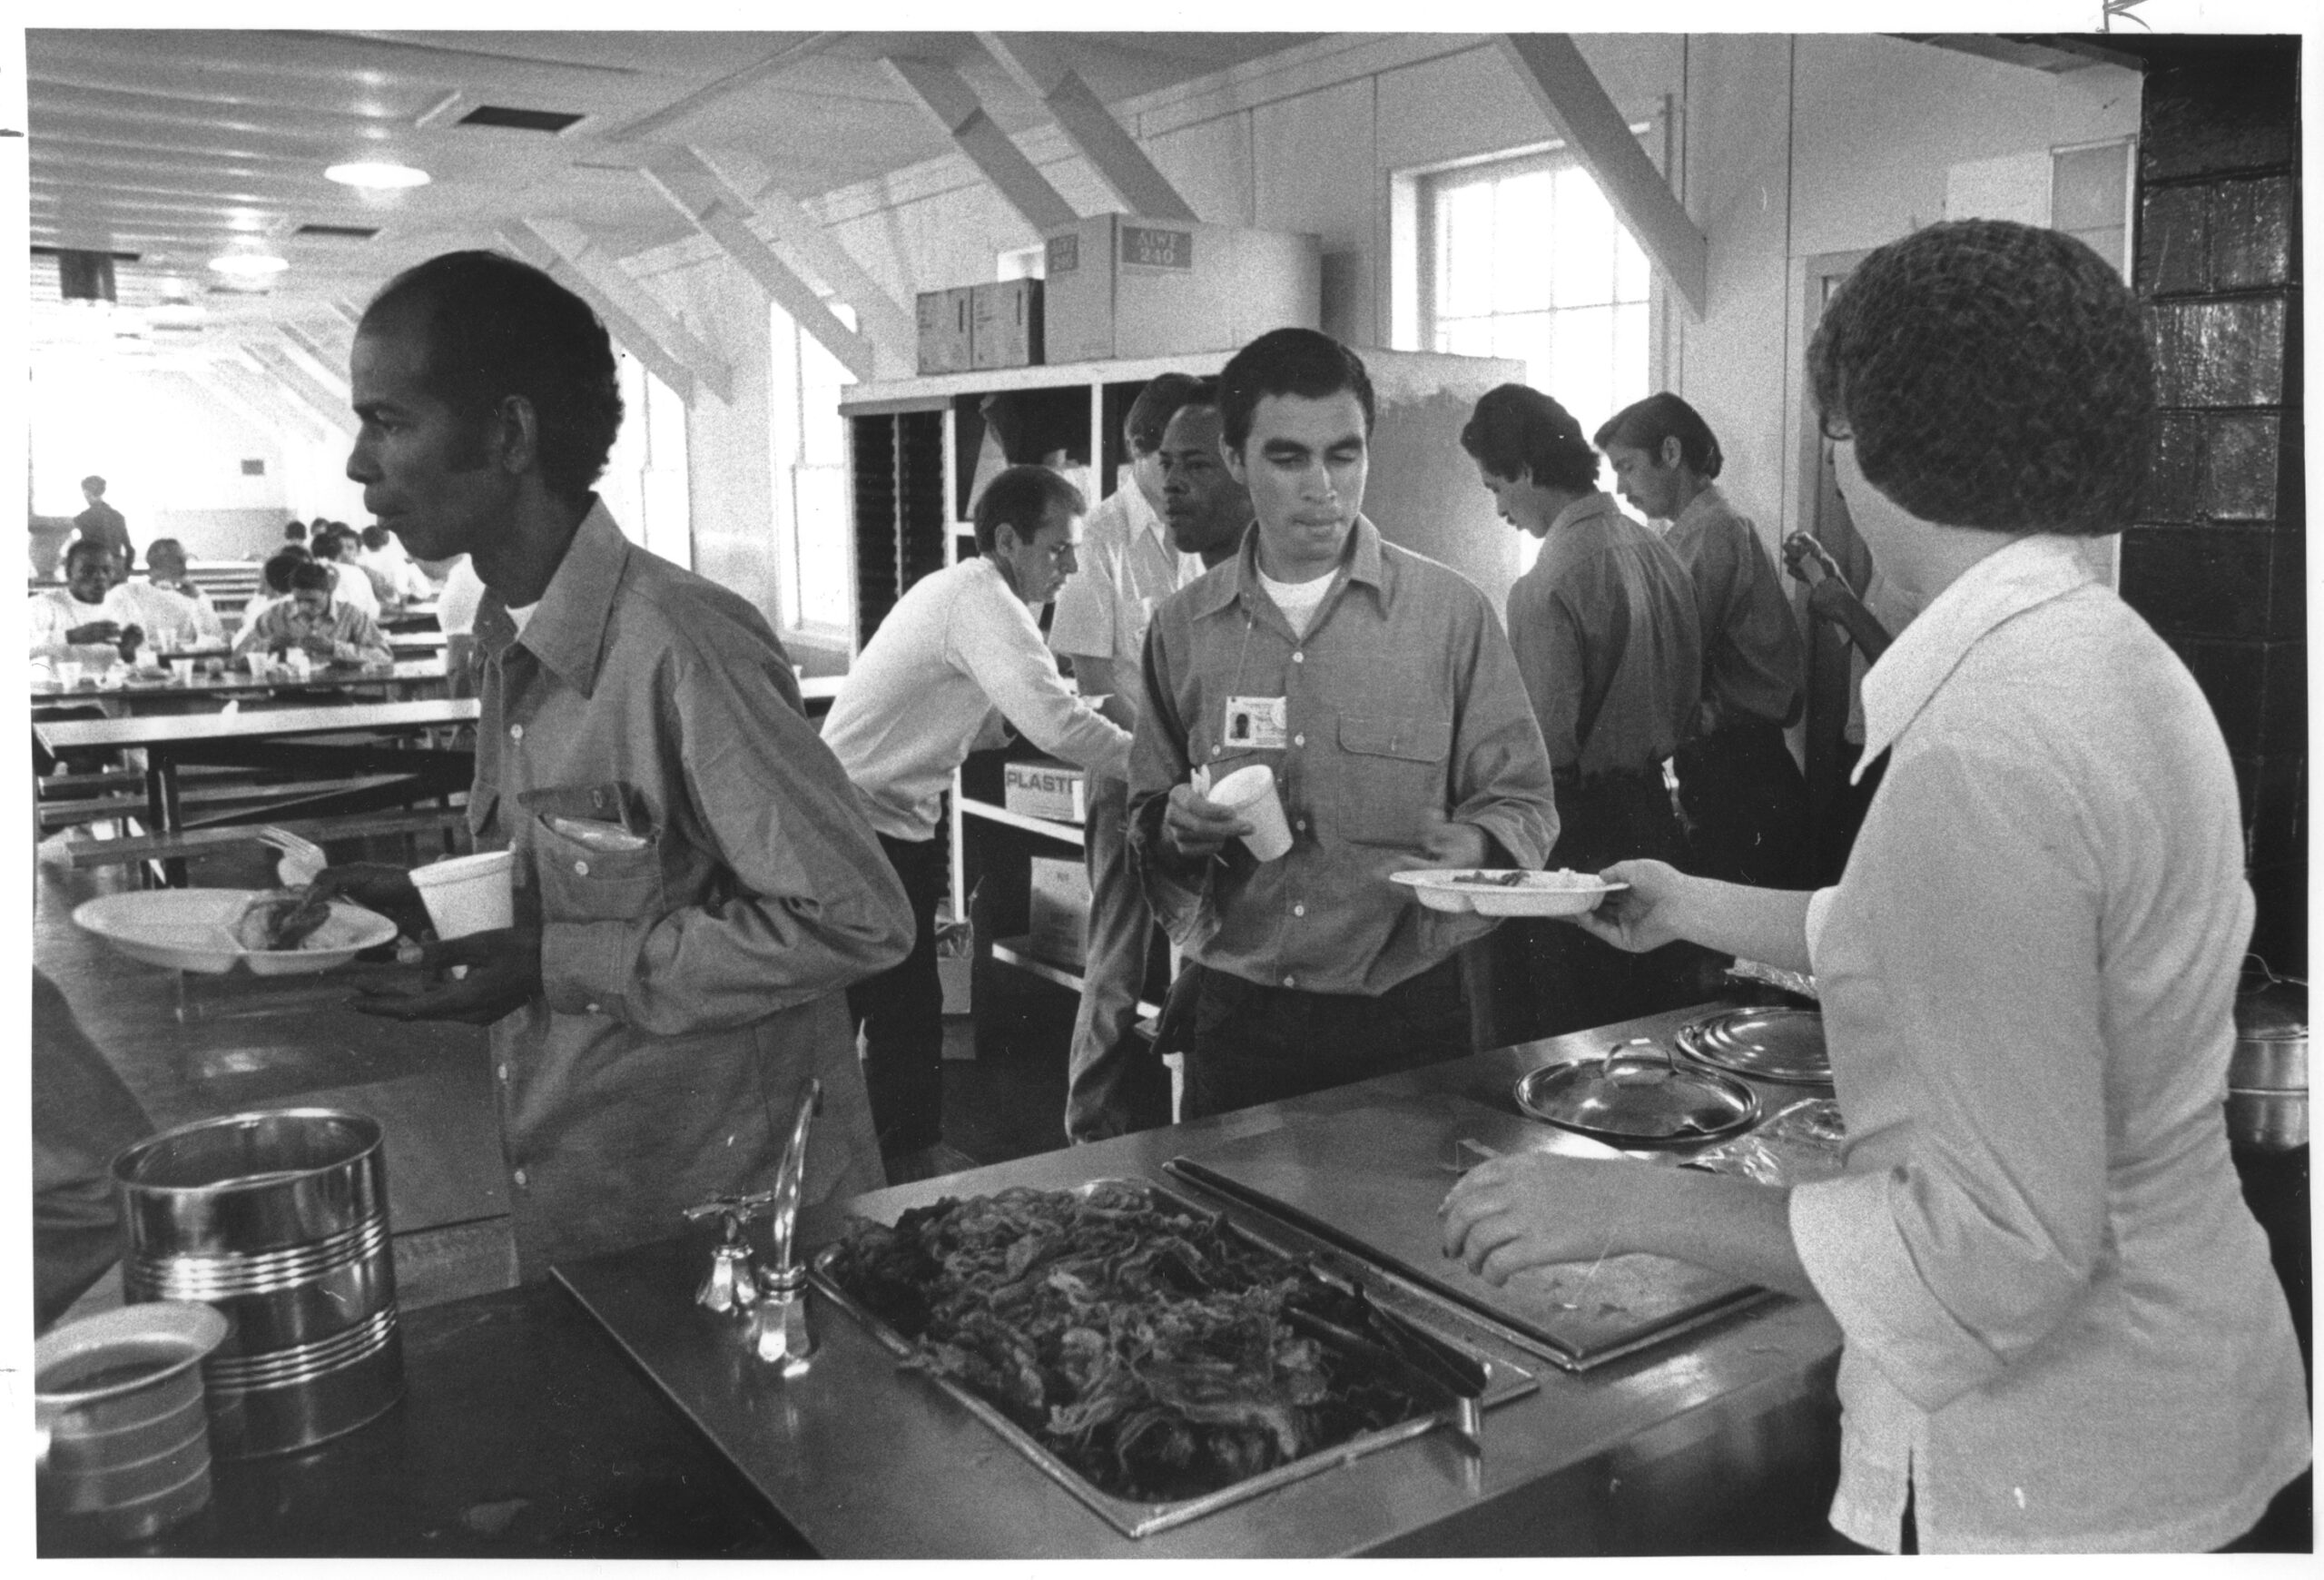 Cuban refugees at Fort McCoy in 1980 are in line at the mess hall